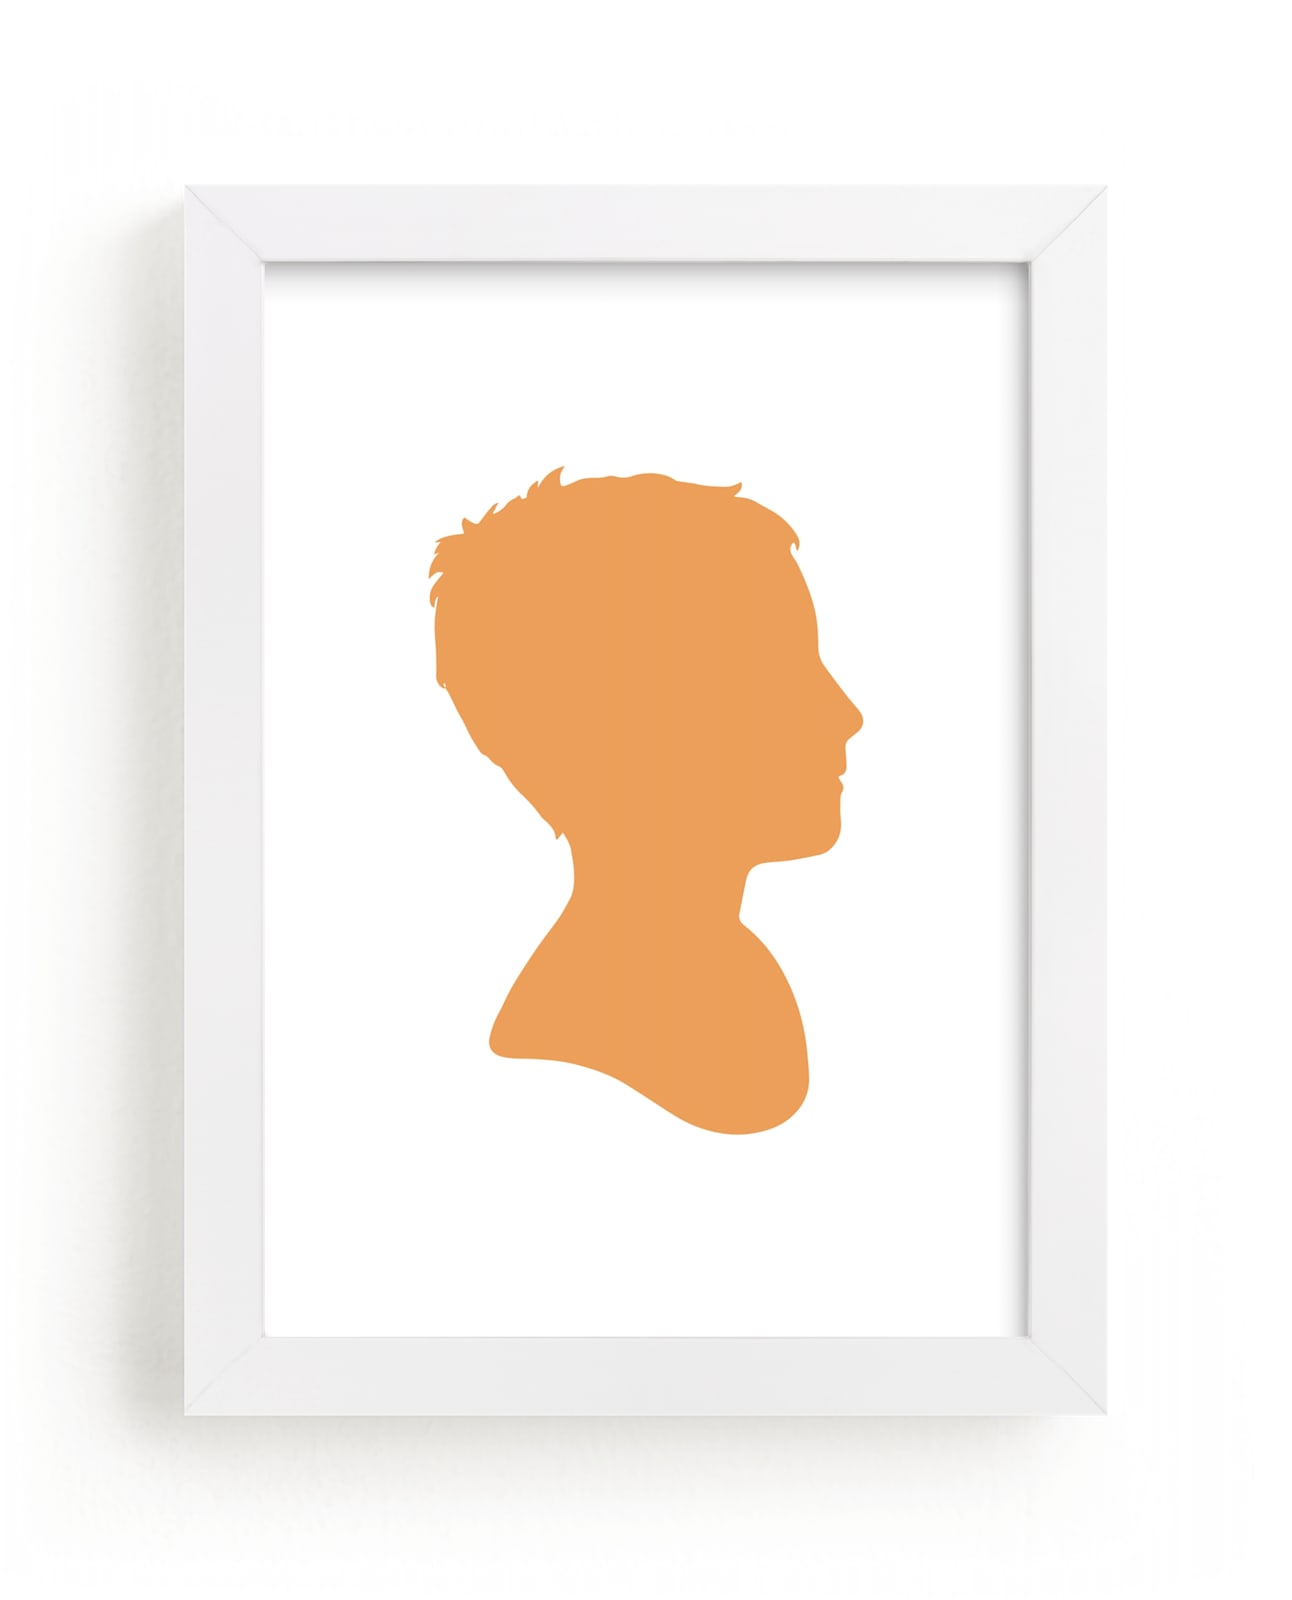 This is a orange silhouette art by Minted called Custom Silhouette Art.